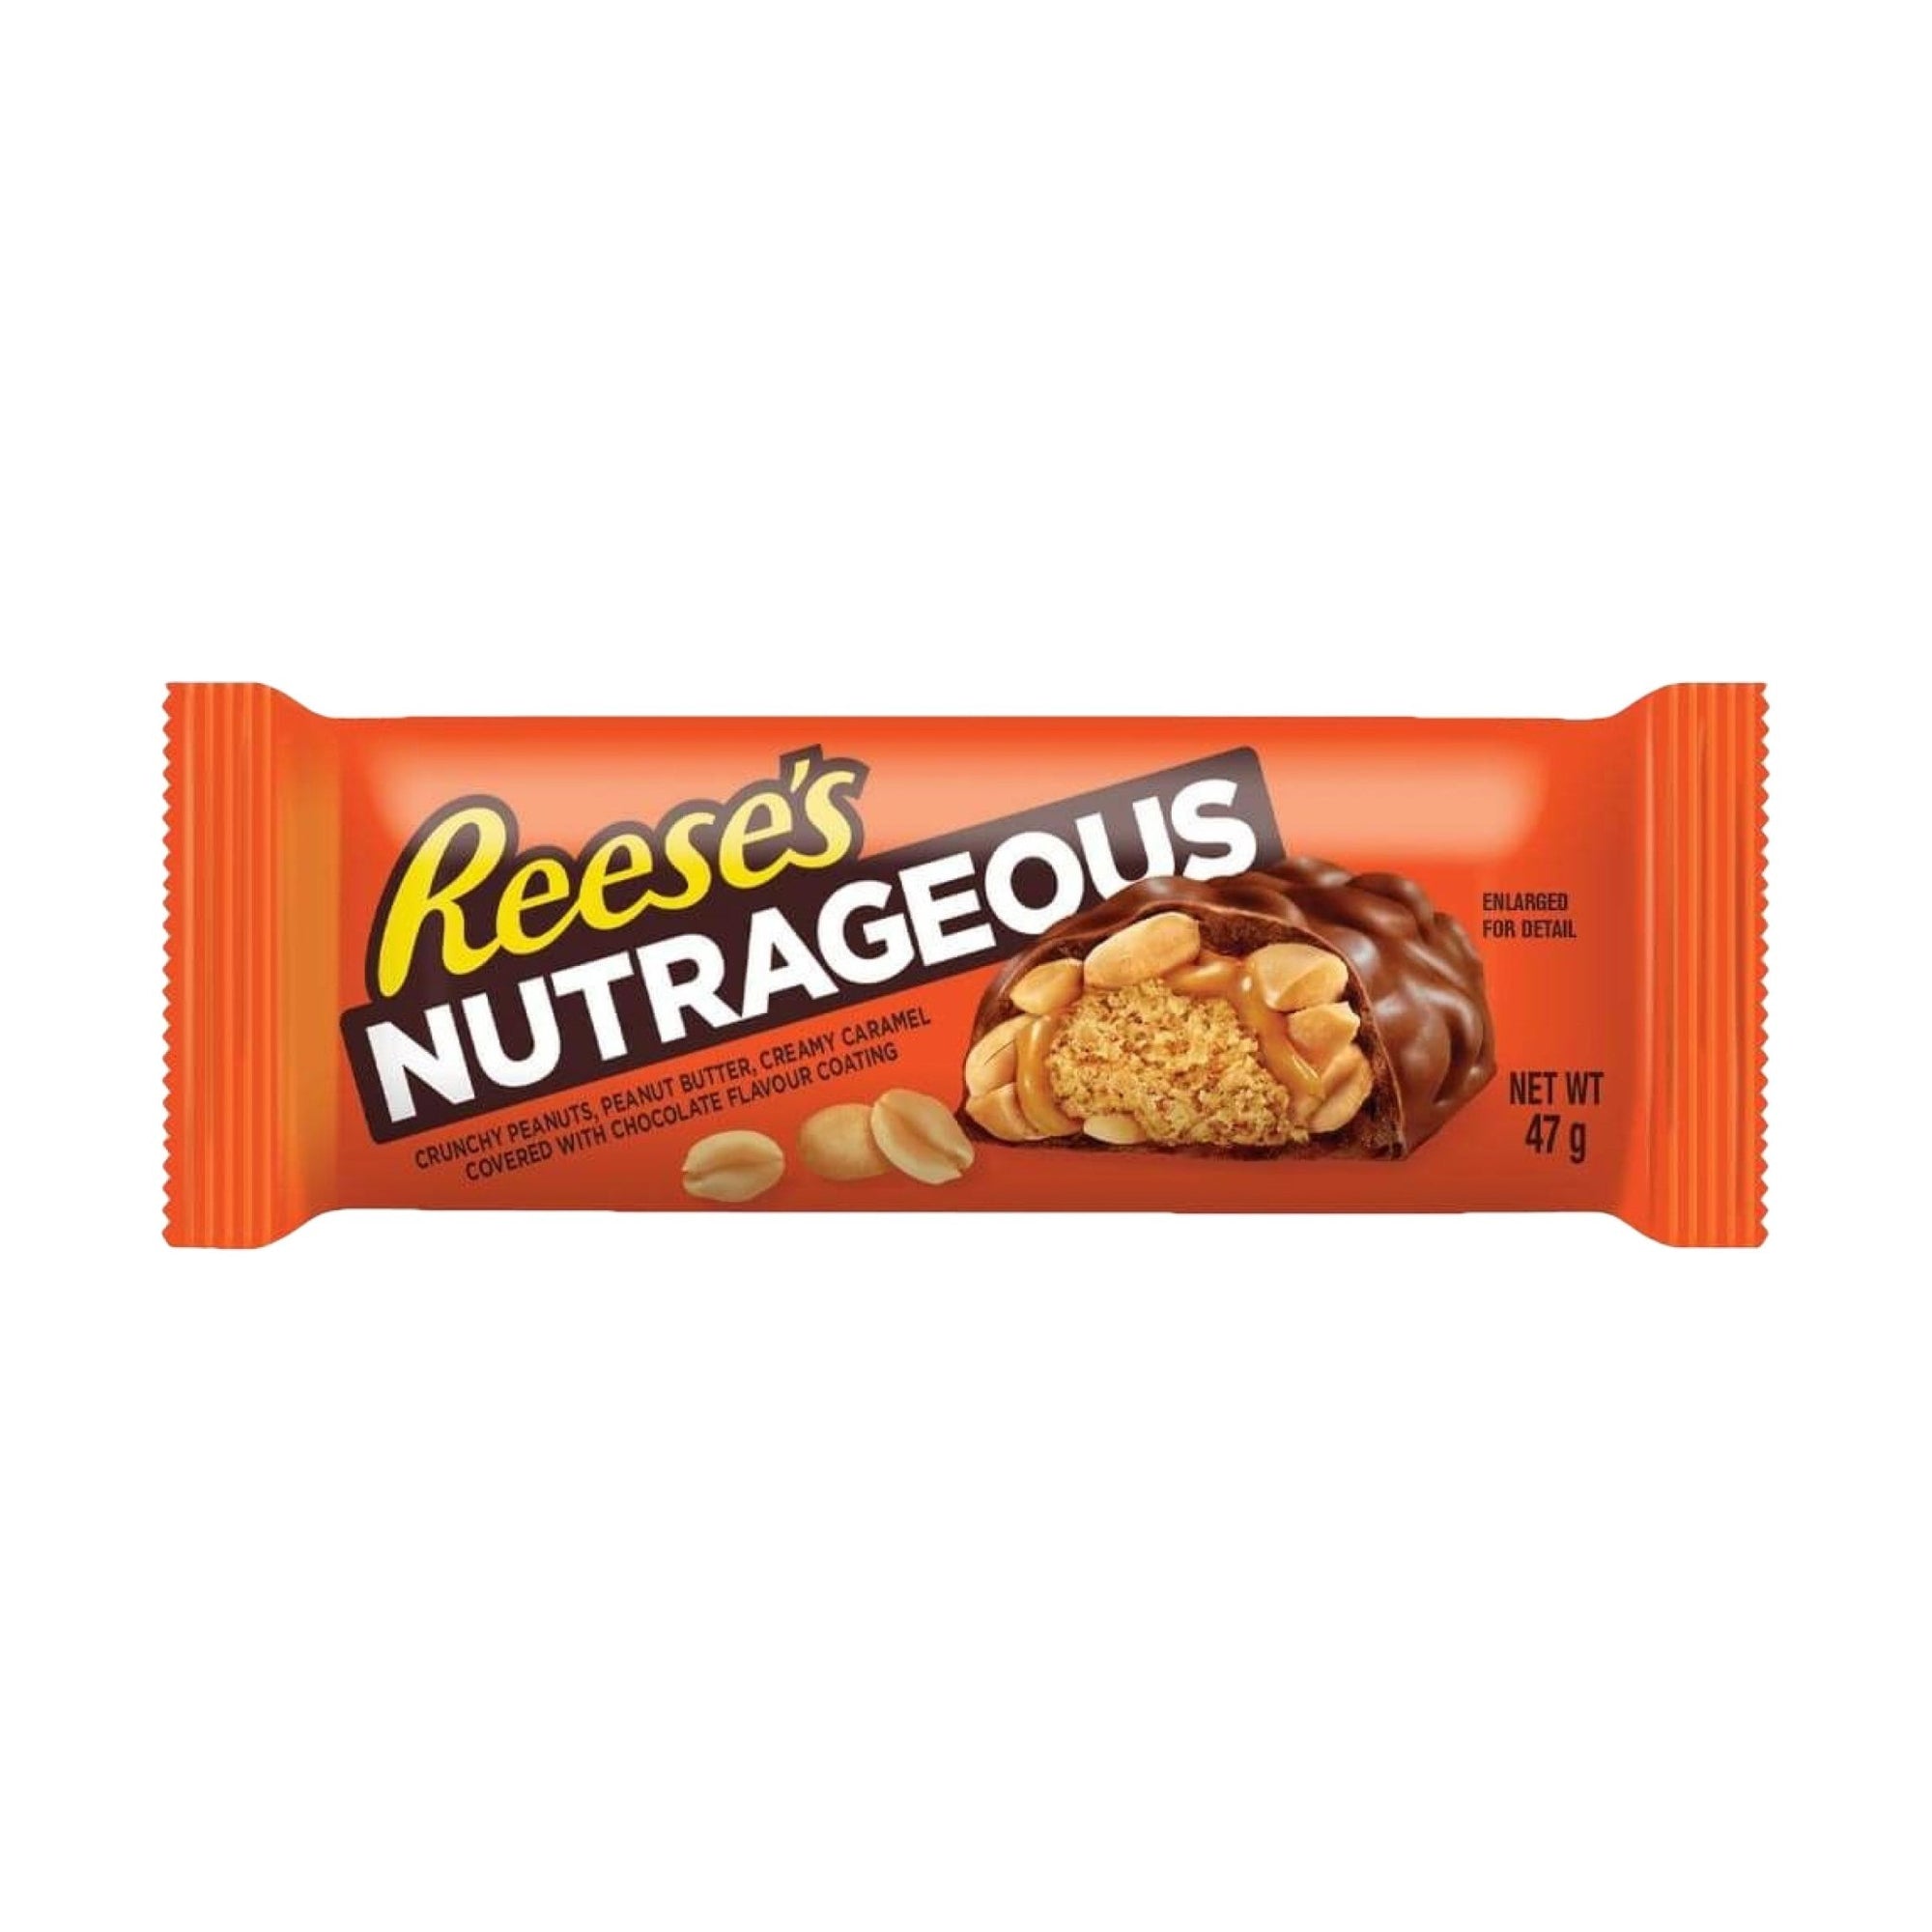 Reese's Nutrageous Bar 47 g - Fast Candy